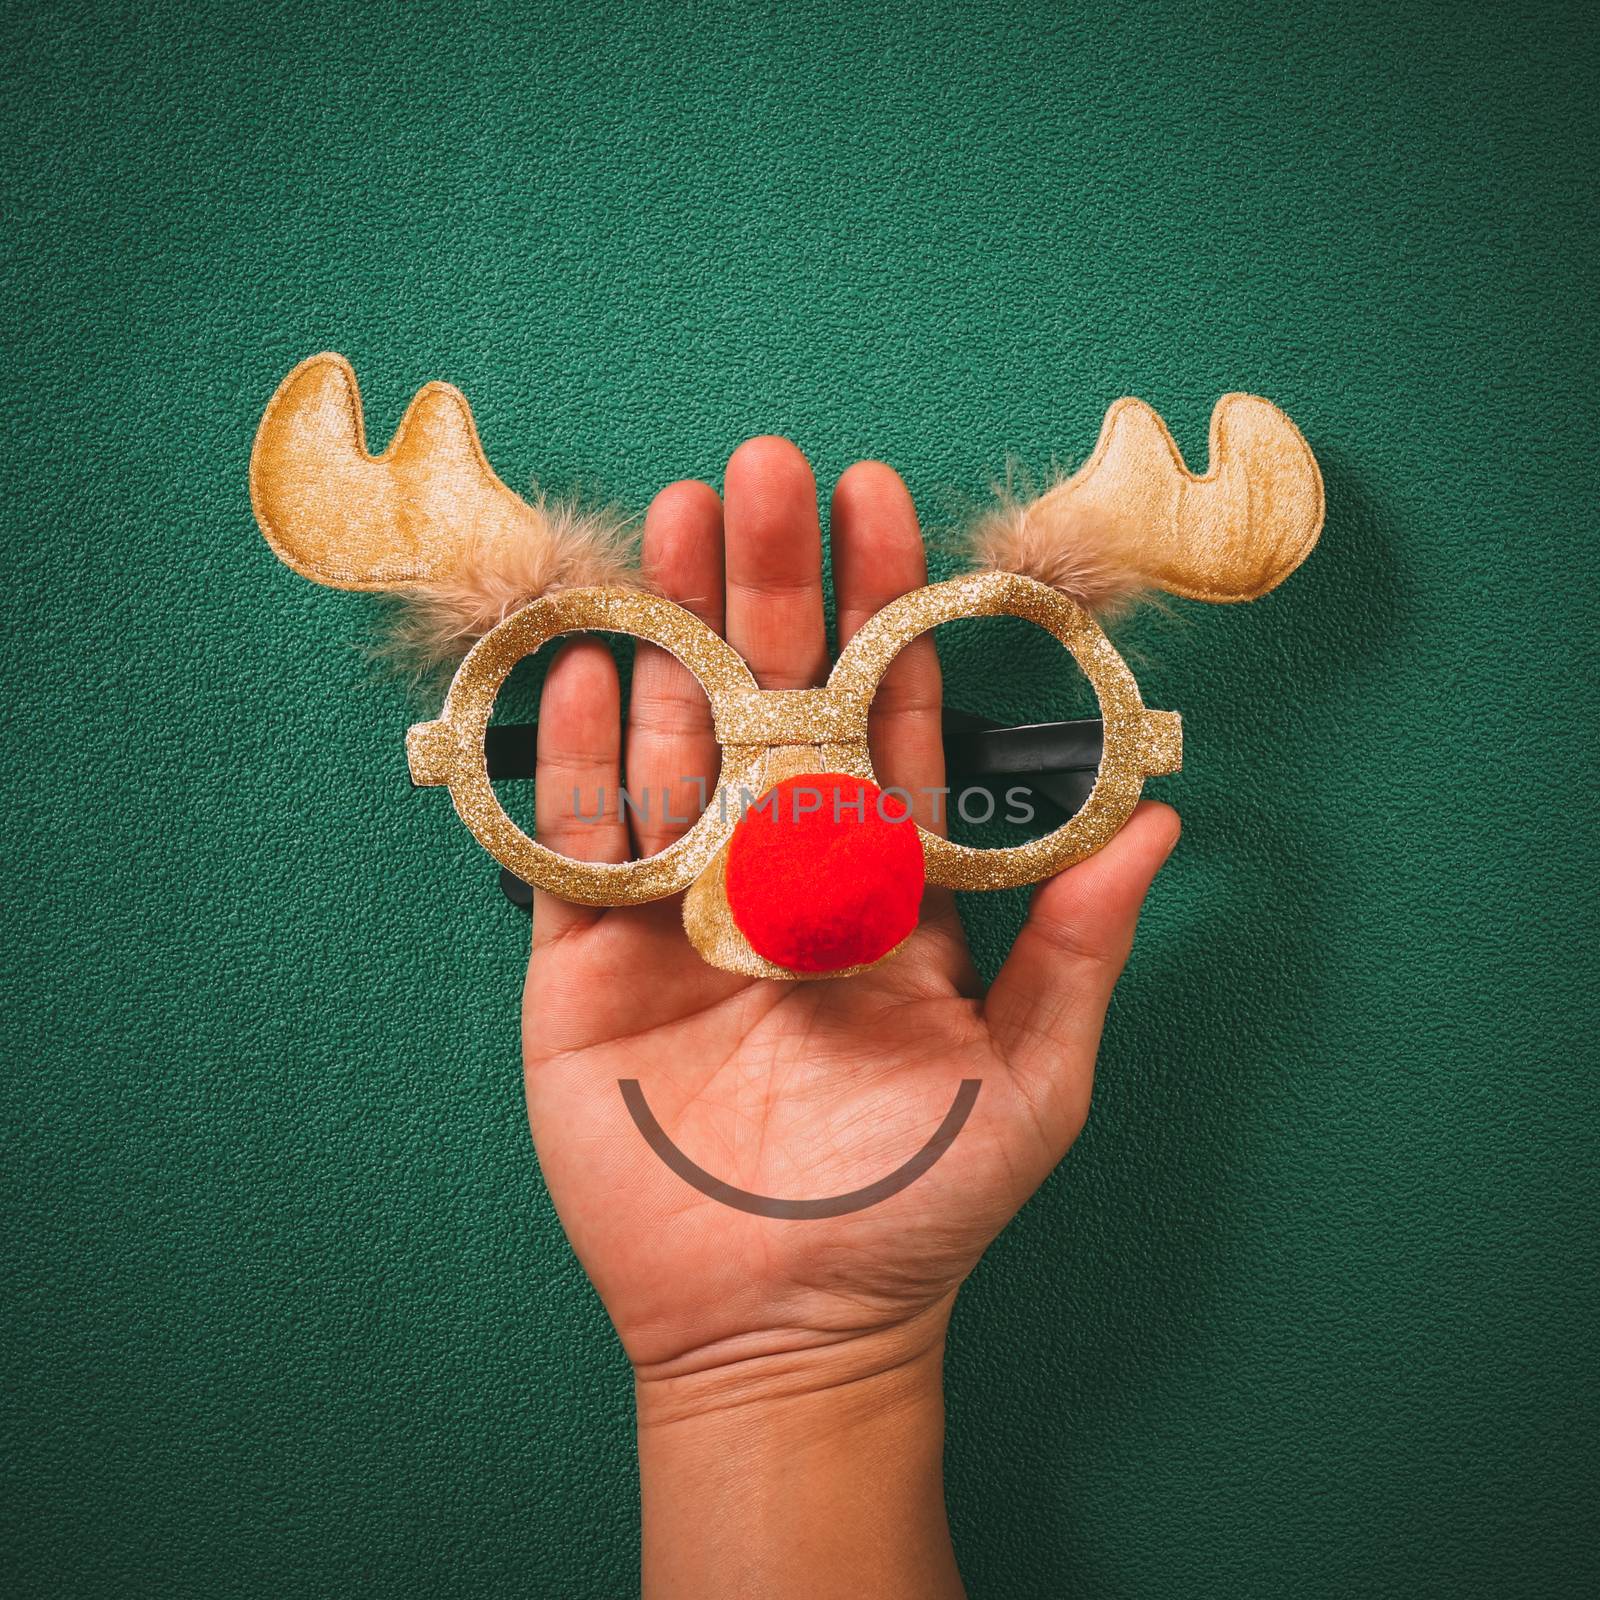 Christmas glasses that decoration with Christmas reindeer and red ball on hand on green  background